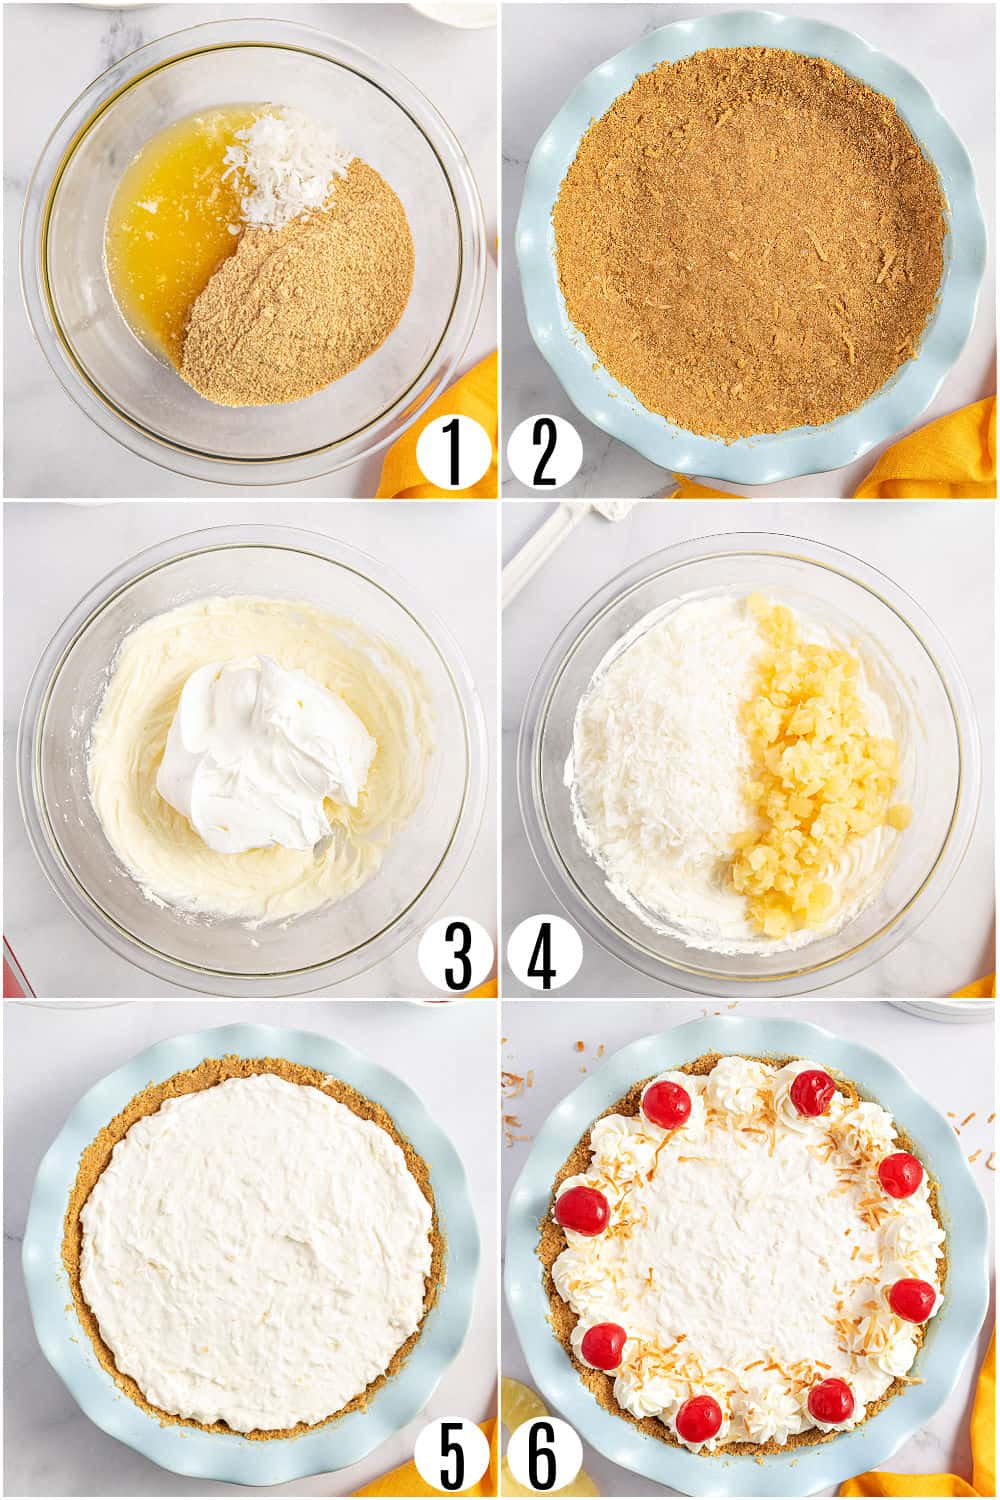 Step by step photos showing how to make pineapple pie.